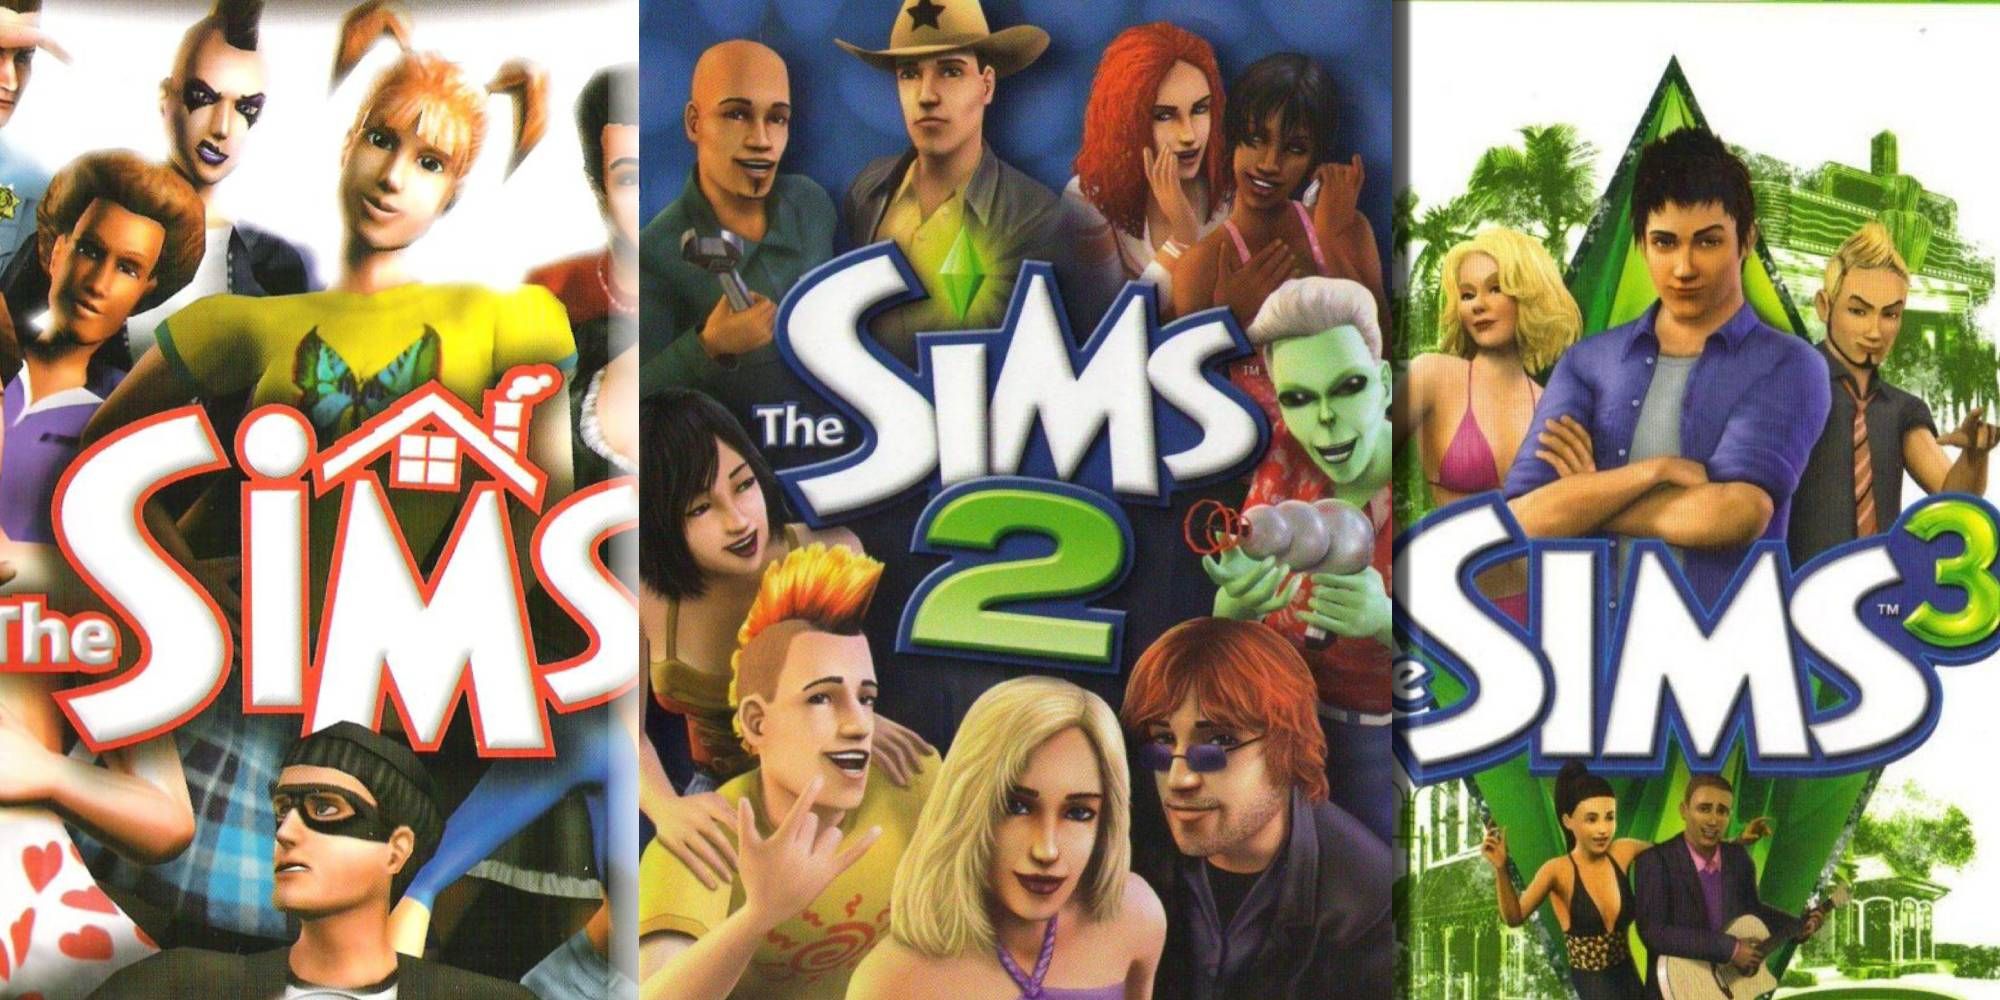 The Sims Mobile - Metacritic